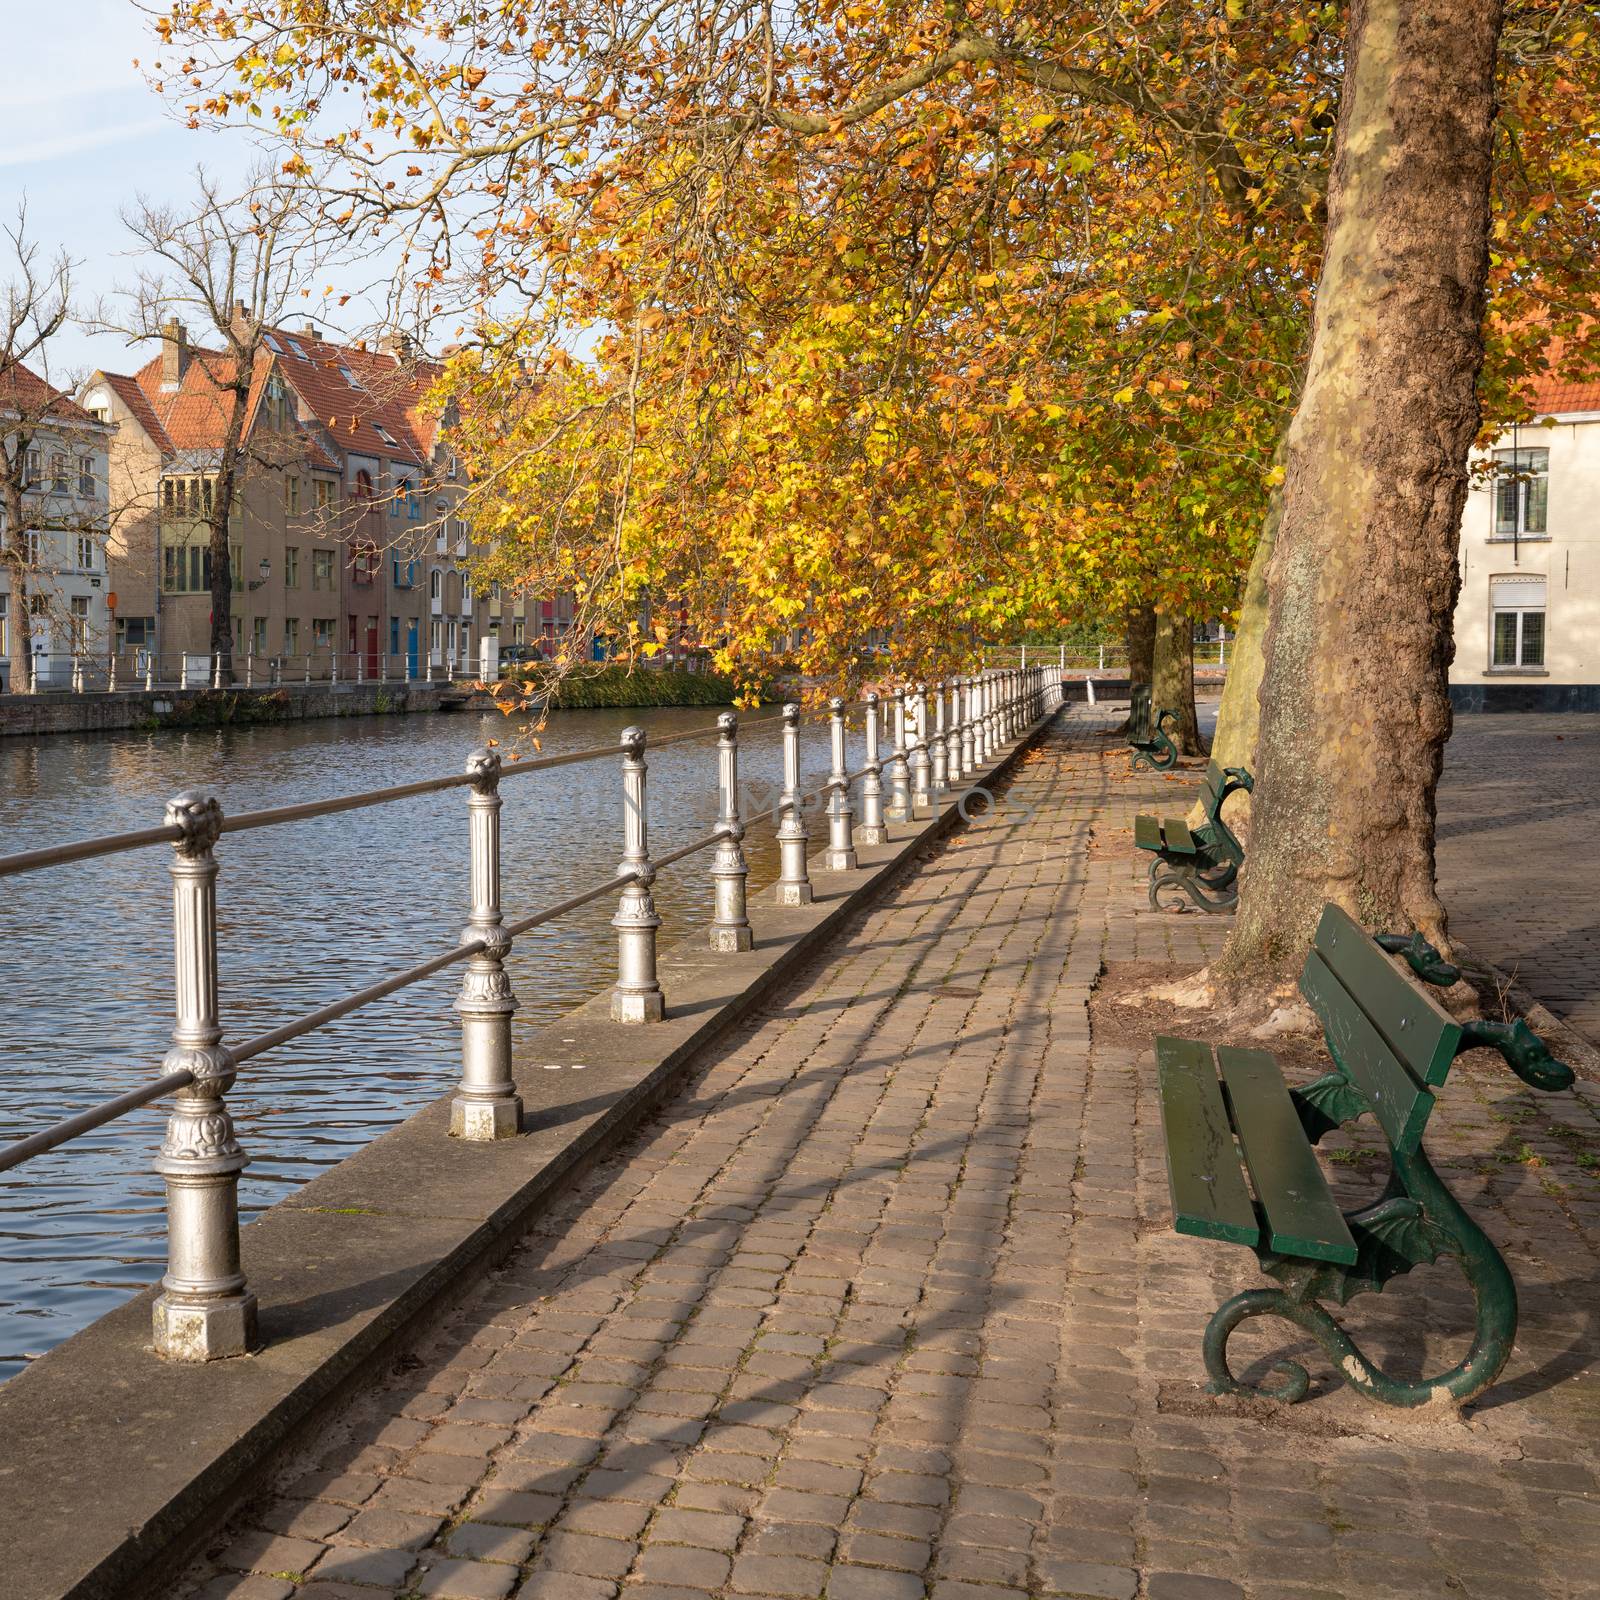 Benches close to the canals of Bruges under colorful trees, Belgium